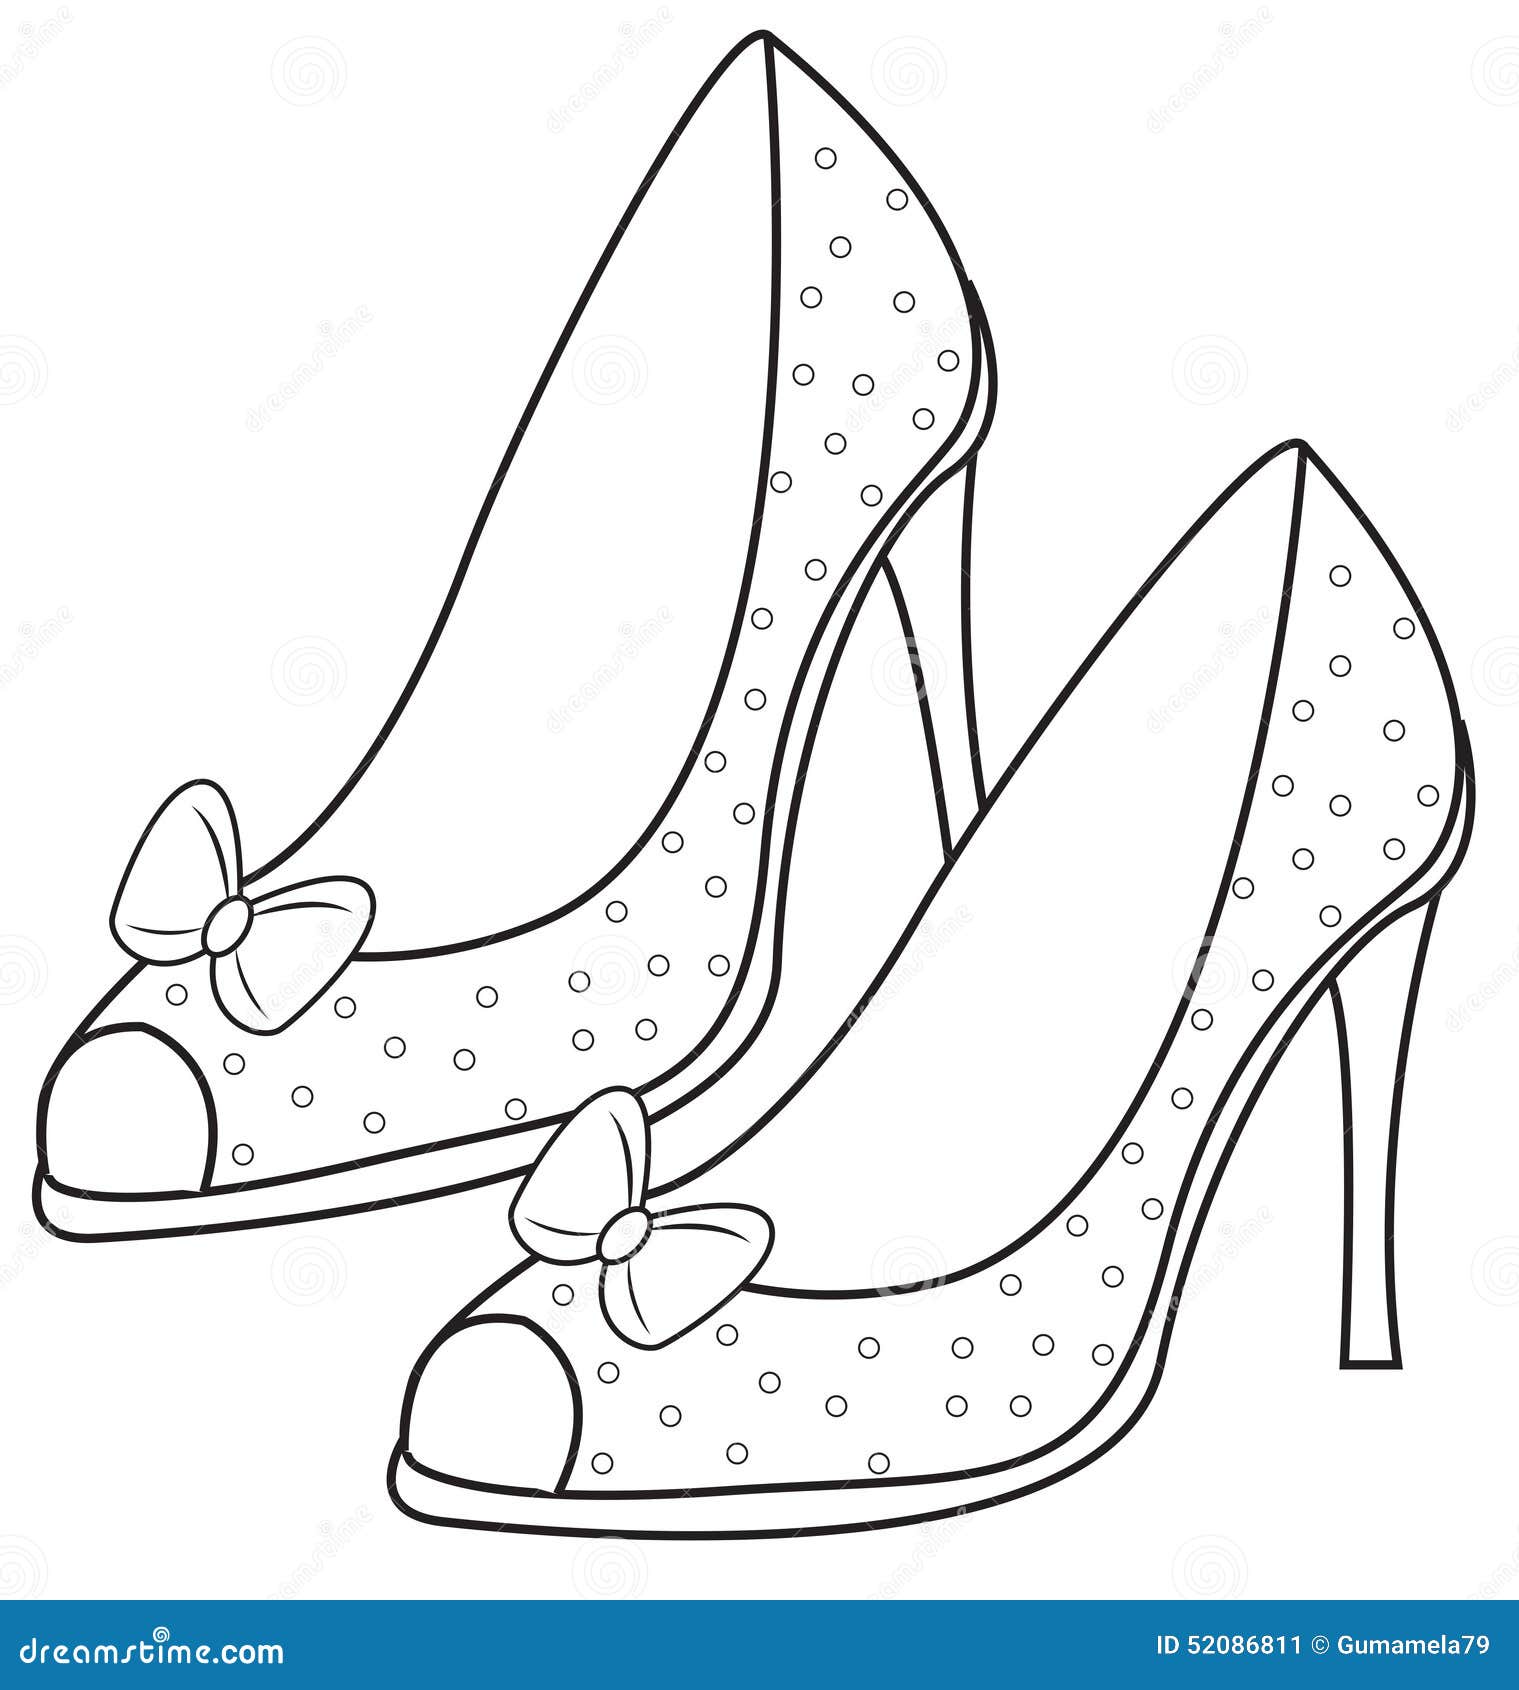 Lady s sandals coloring page stock illustration